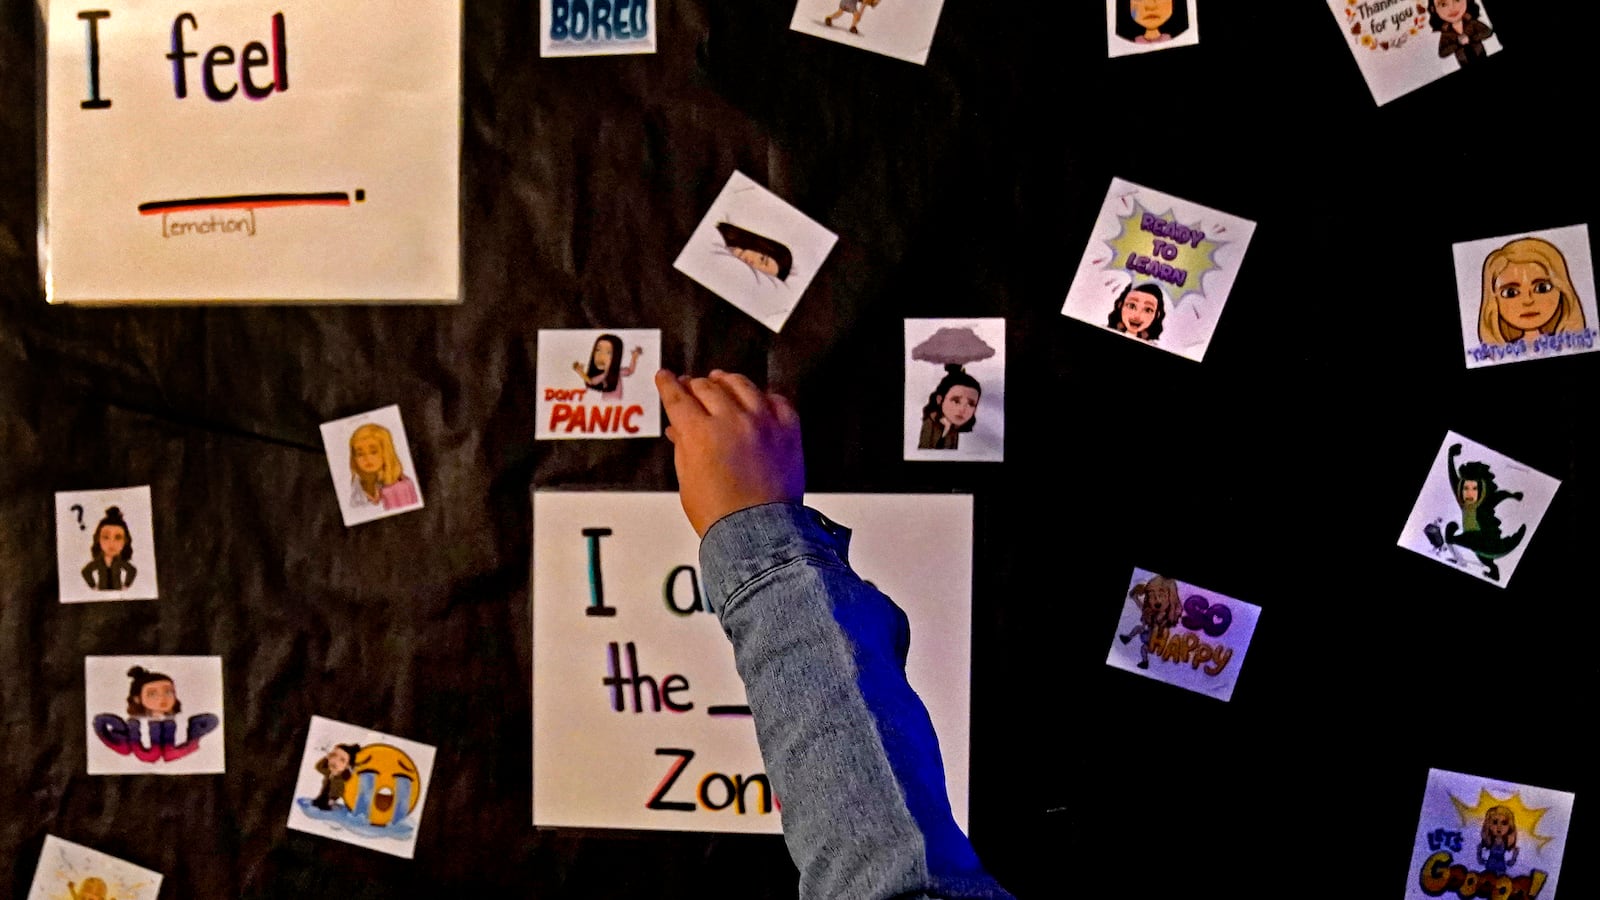 An elementary school student points to markers indicating her feelings on a black wall.